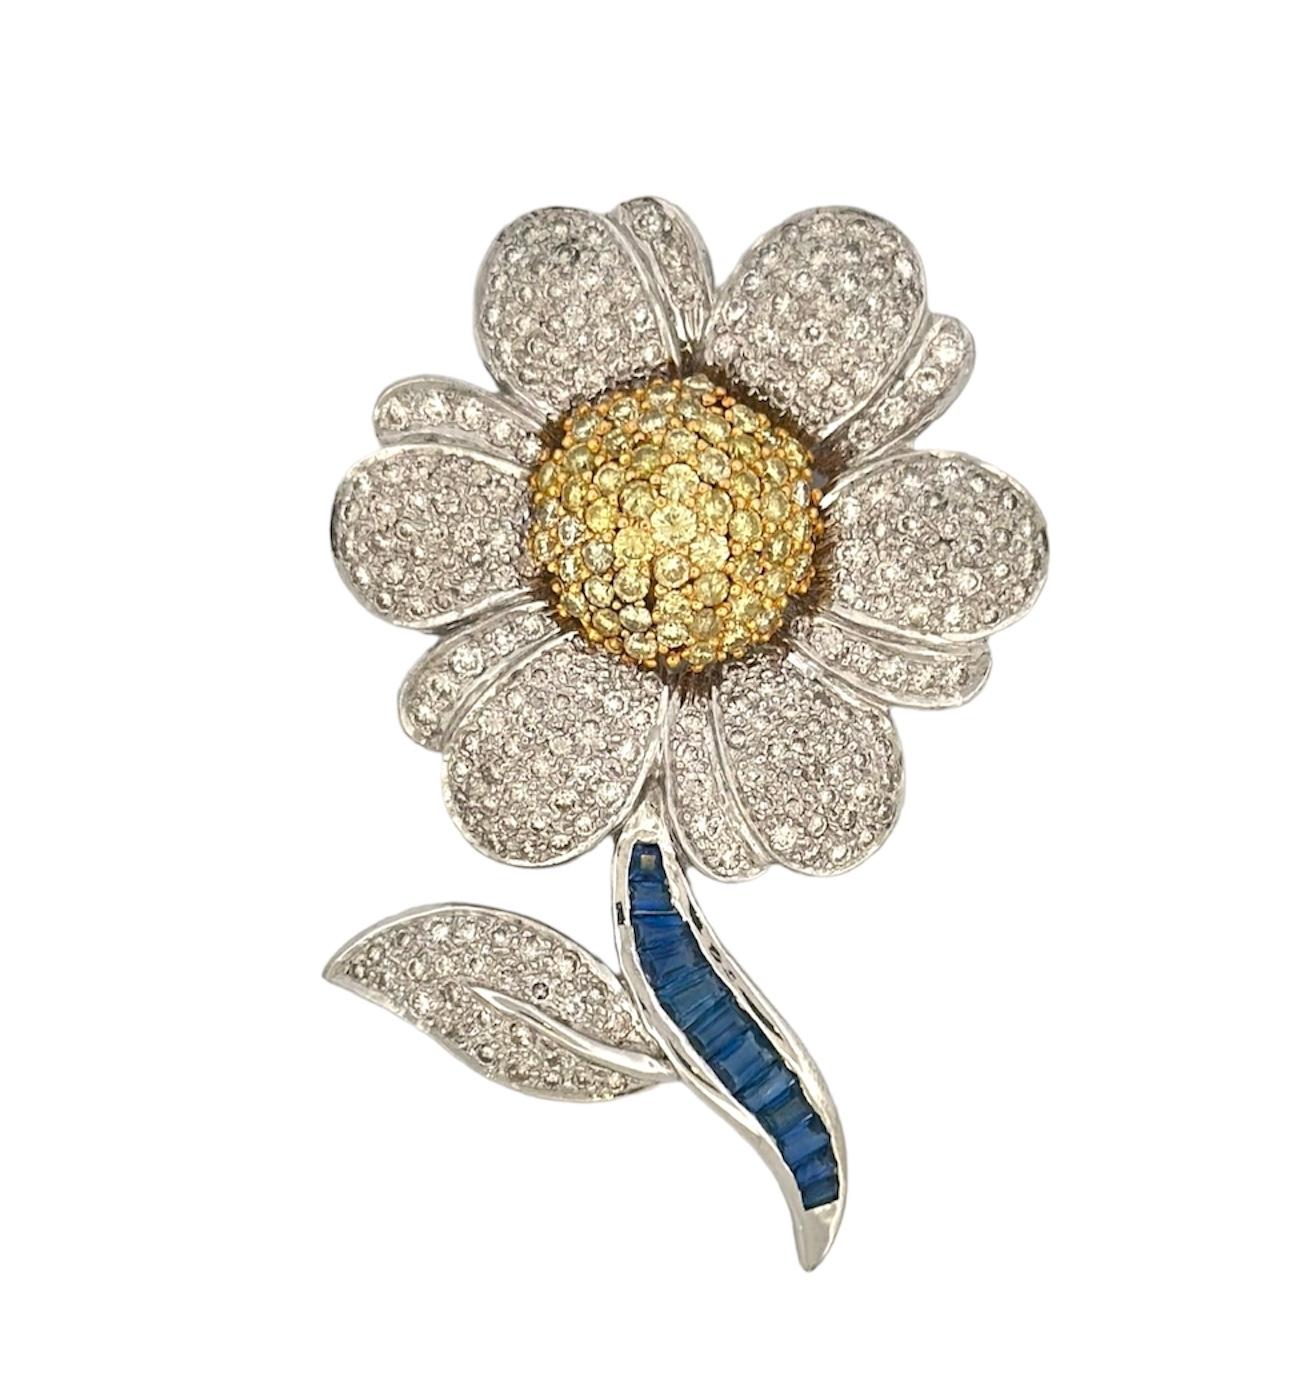 The Fancy Flower Shaped Diamond Brooch is a captivating antique piece that transports us to the early 20th century, showcasing the enduring charm of vintage jewelry. This exceptional brooch features a total diamond weight of 5.04 carats and is